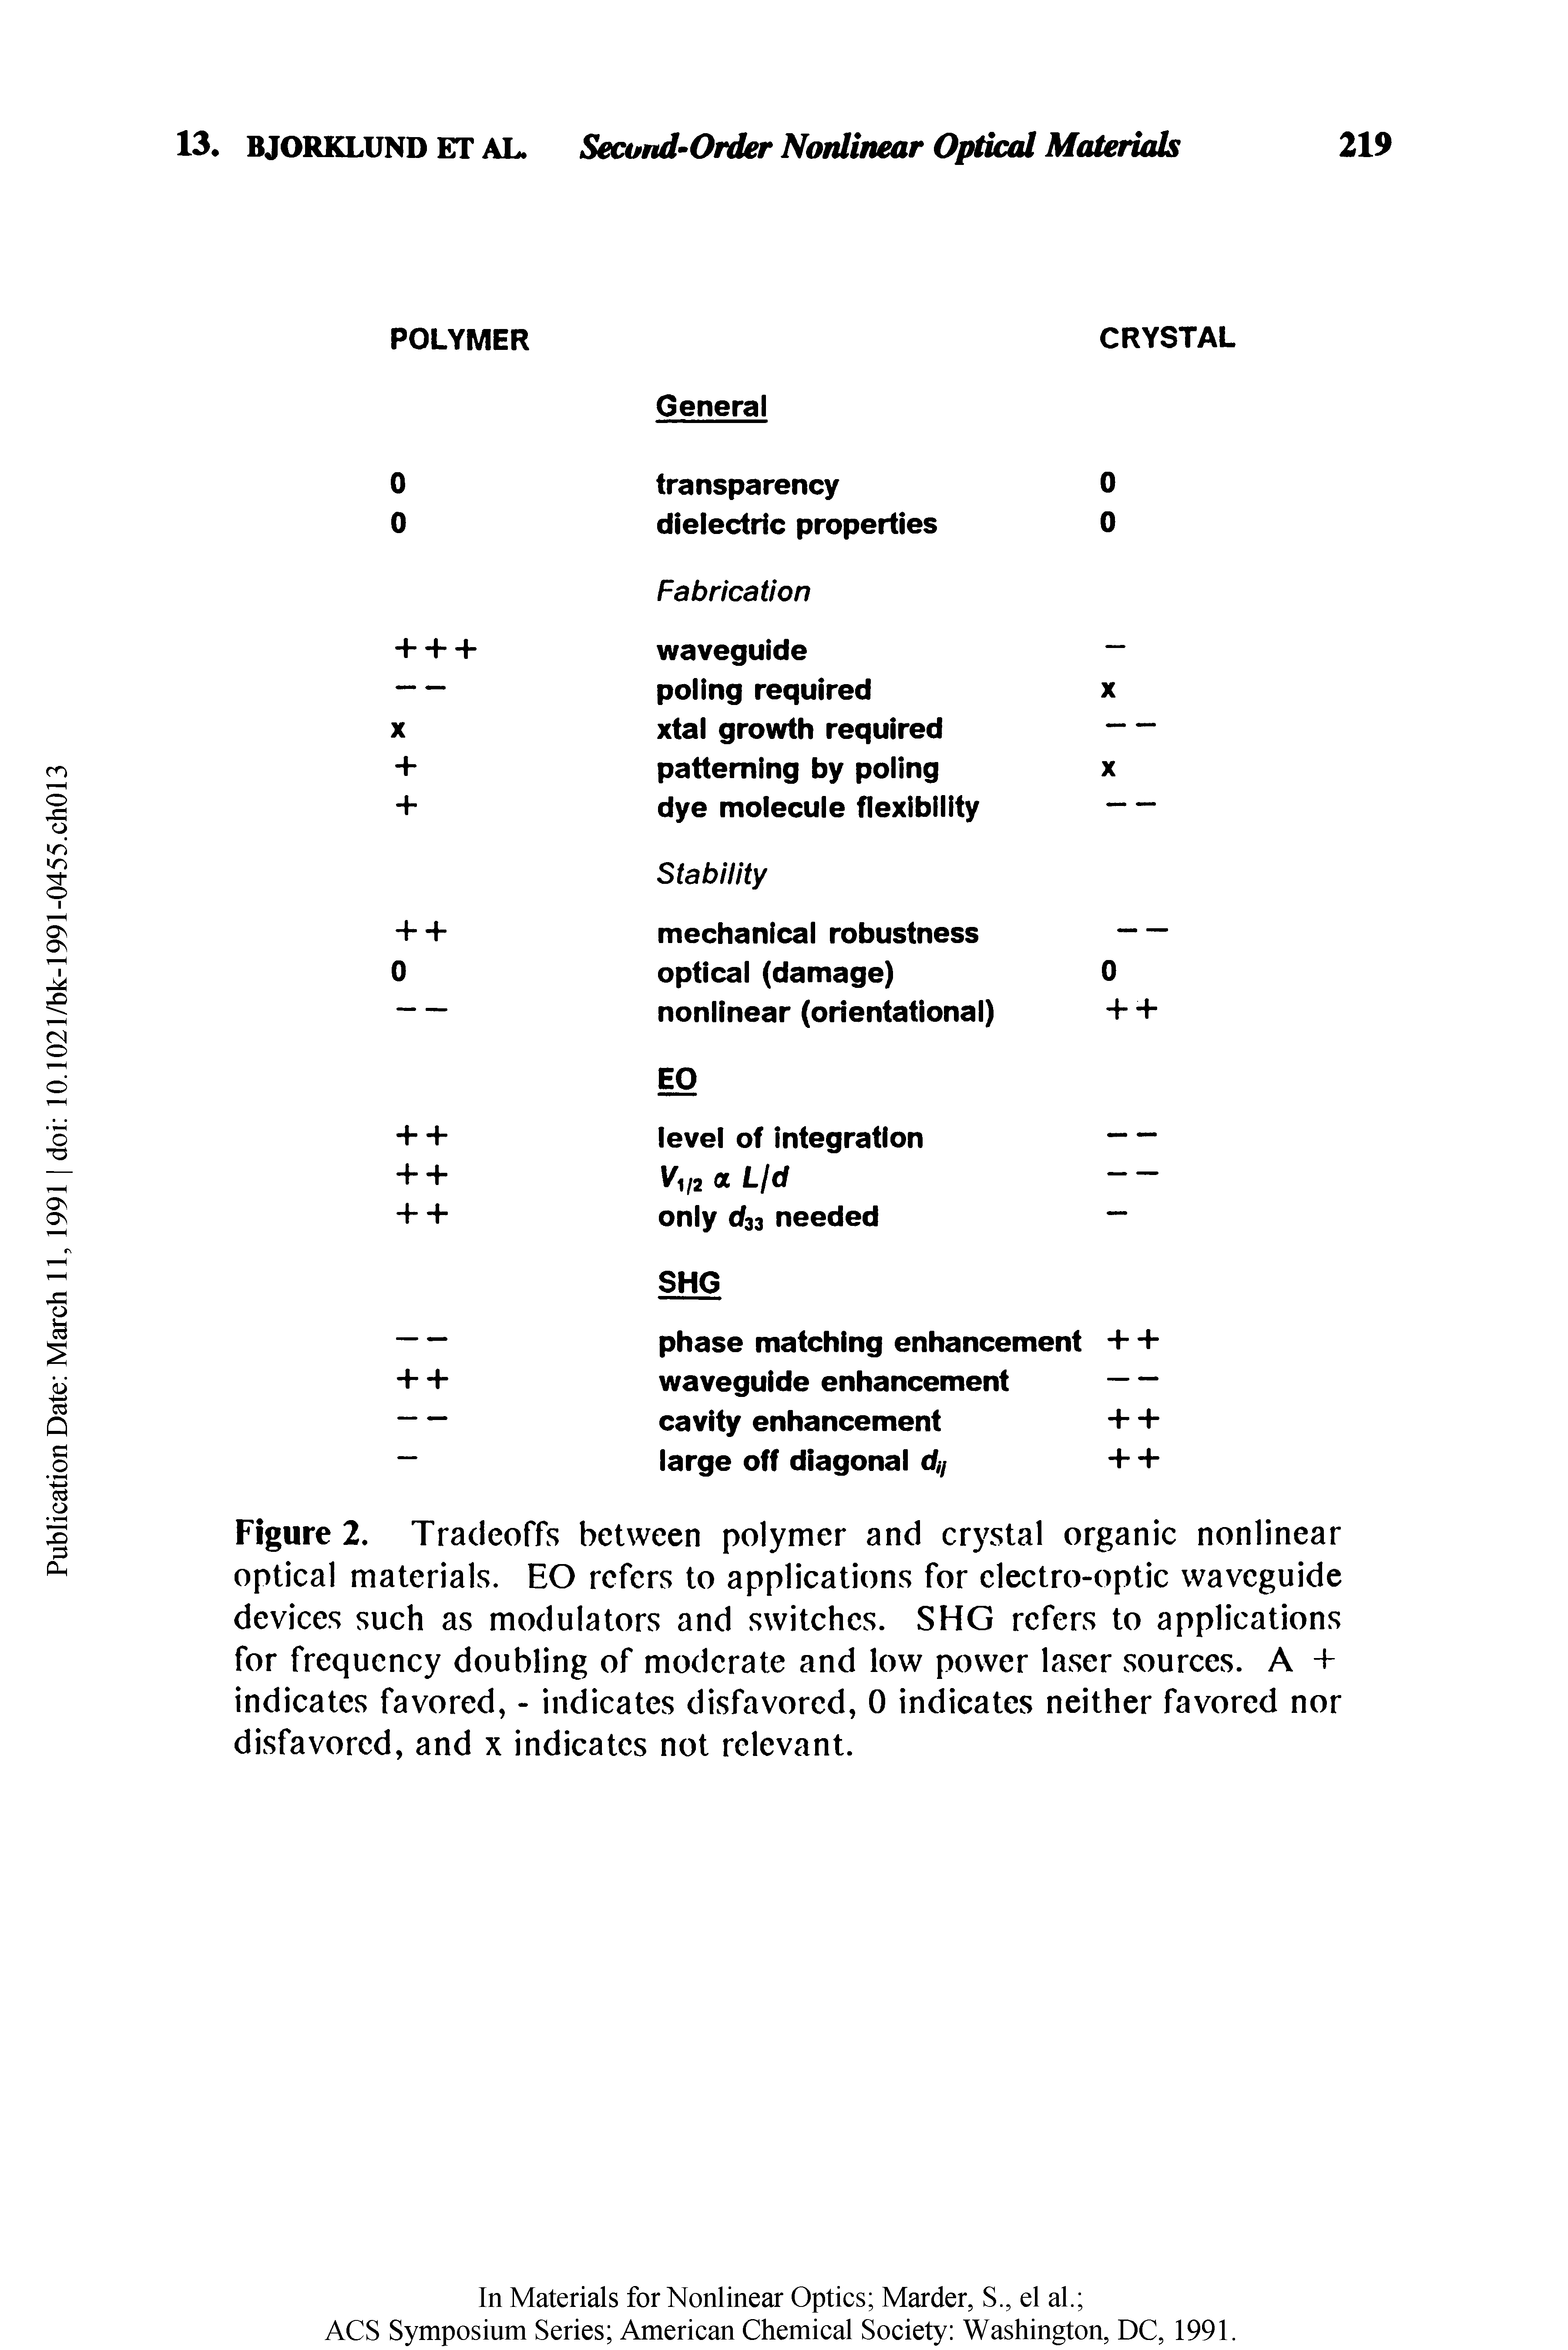 Figure 2. Tradeoffs between polymer and crystal organic nonlinear optical materials. EO refers to applications for electro-optic waveguide devices such as modulators and switches. SHG refers to applications for frequency doubling of moderate and low power laser sources. A + indicates favored, - indicates disfavored, 0 indicates neither favored nor disfavored, and x indicates not relevant.